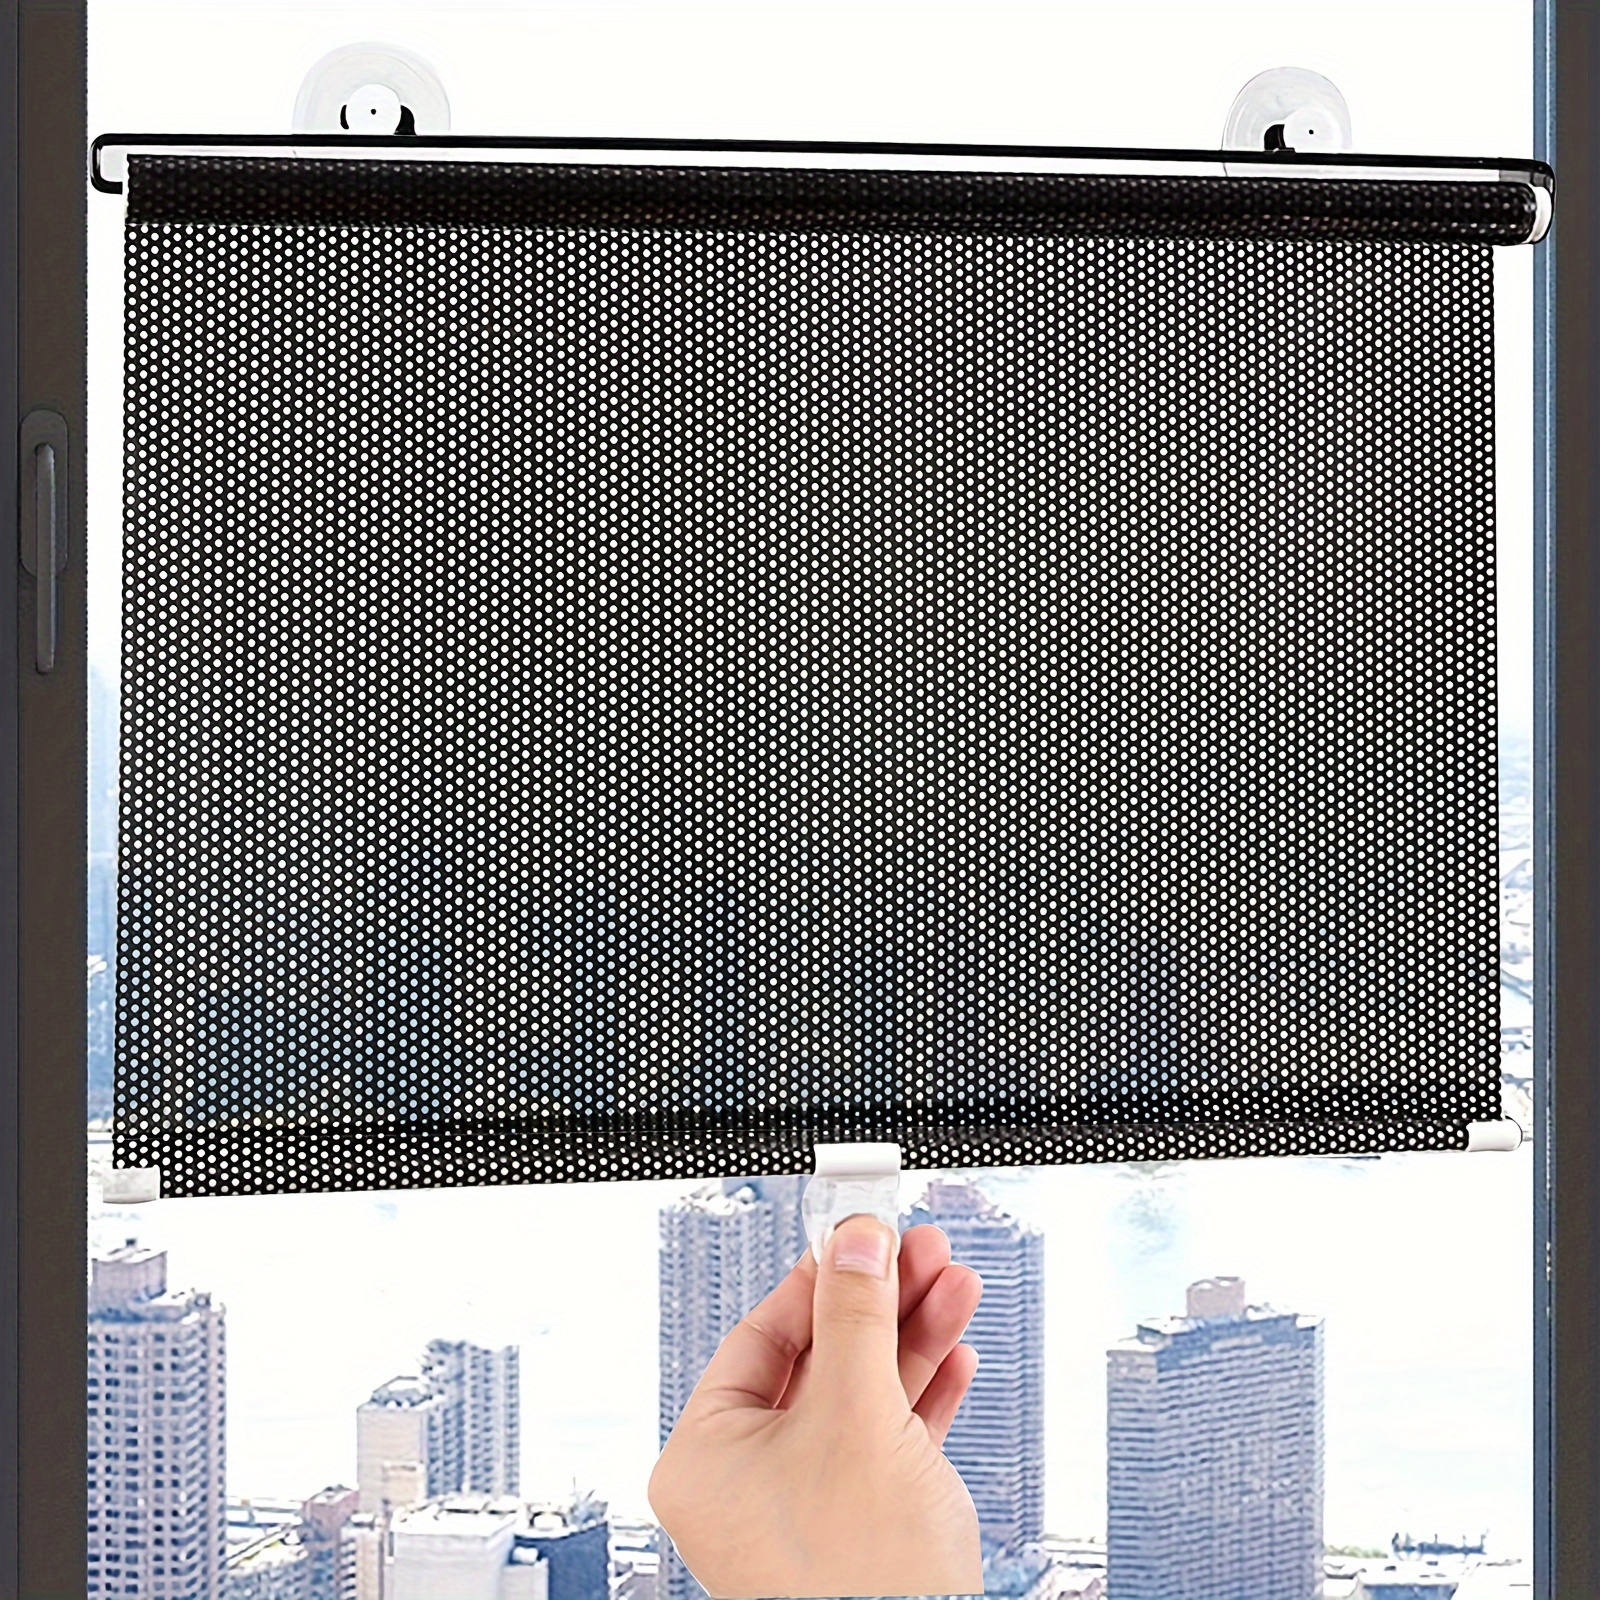 

No-drill Blackout Curtains With Suction Cups, Temporary Portable Roller Blinds For Homes, Offices And Cars, Black 50% Shading